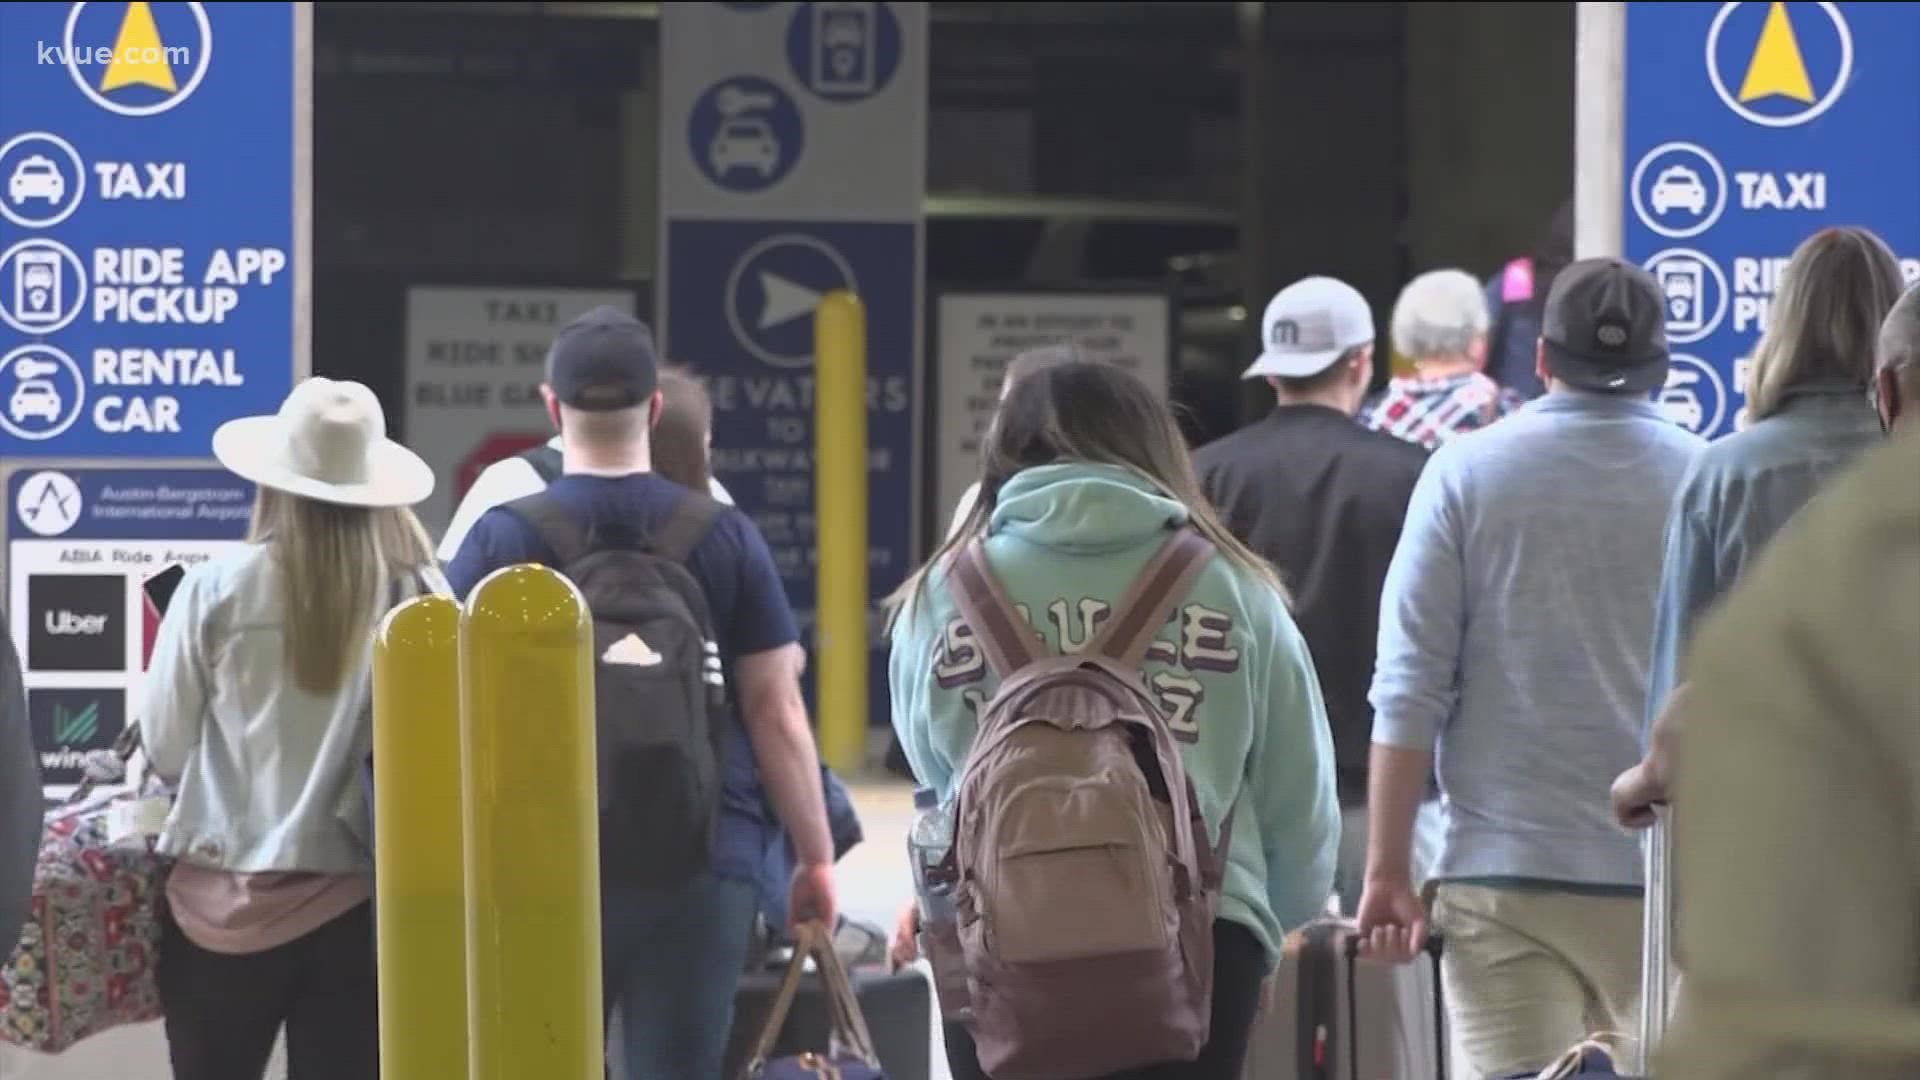 The TSA is expecting to screen 24,500 flyers at the Austin airport on Thursday. That indicates it's going to be a busy Labor Day weekend.